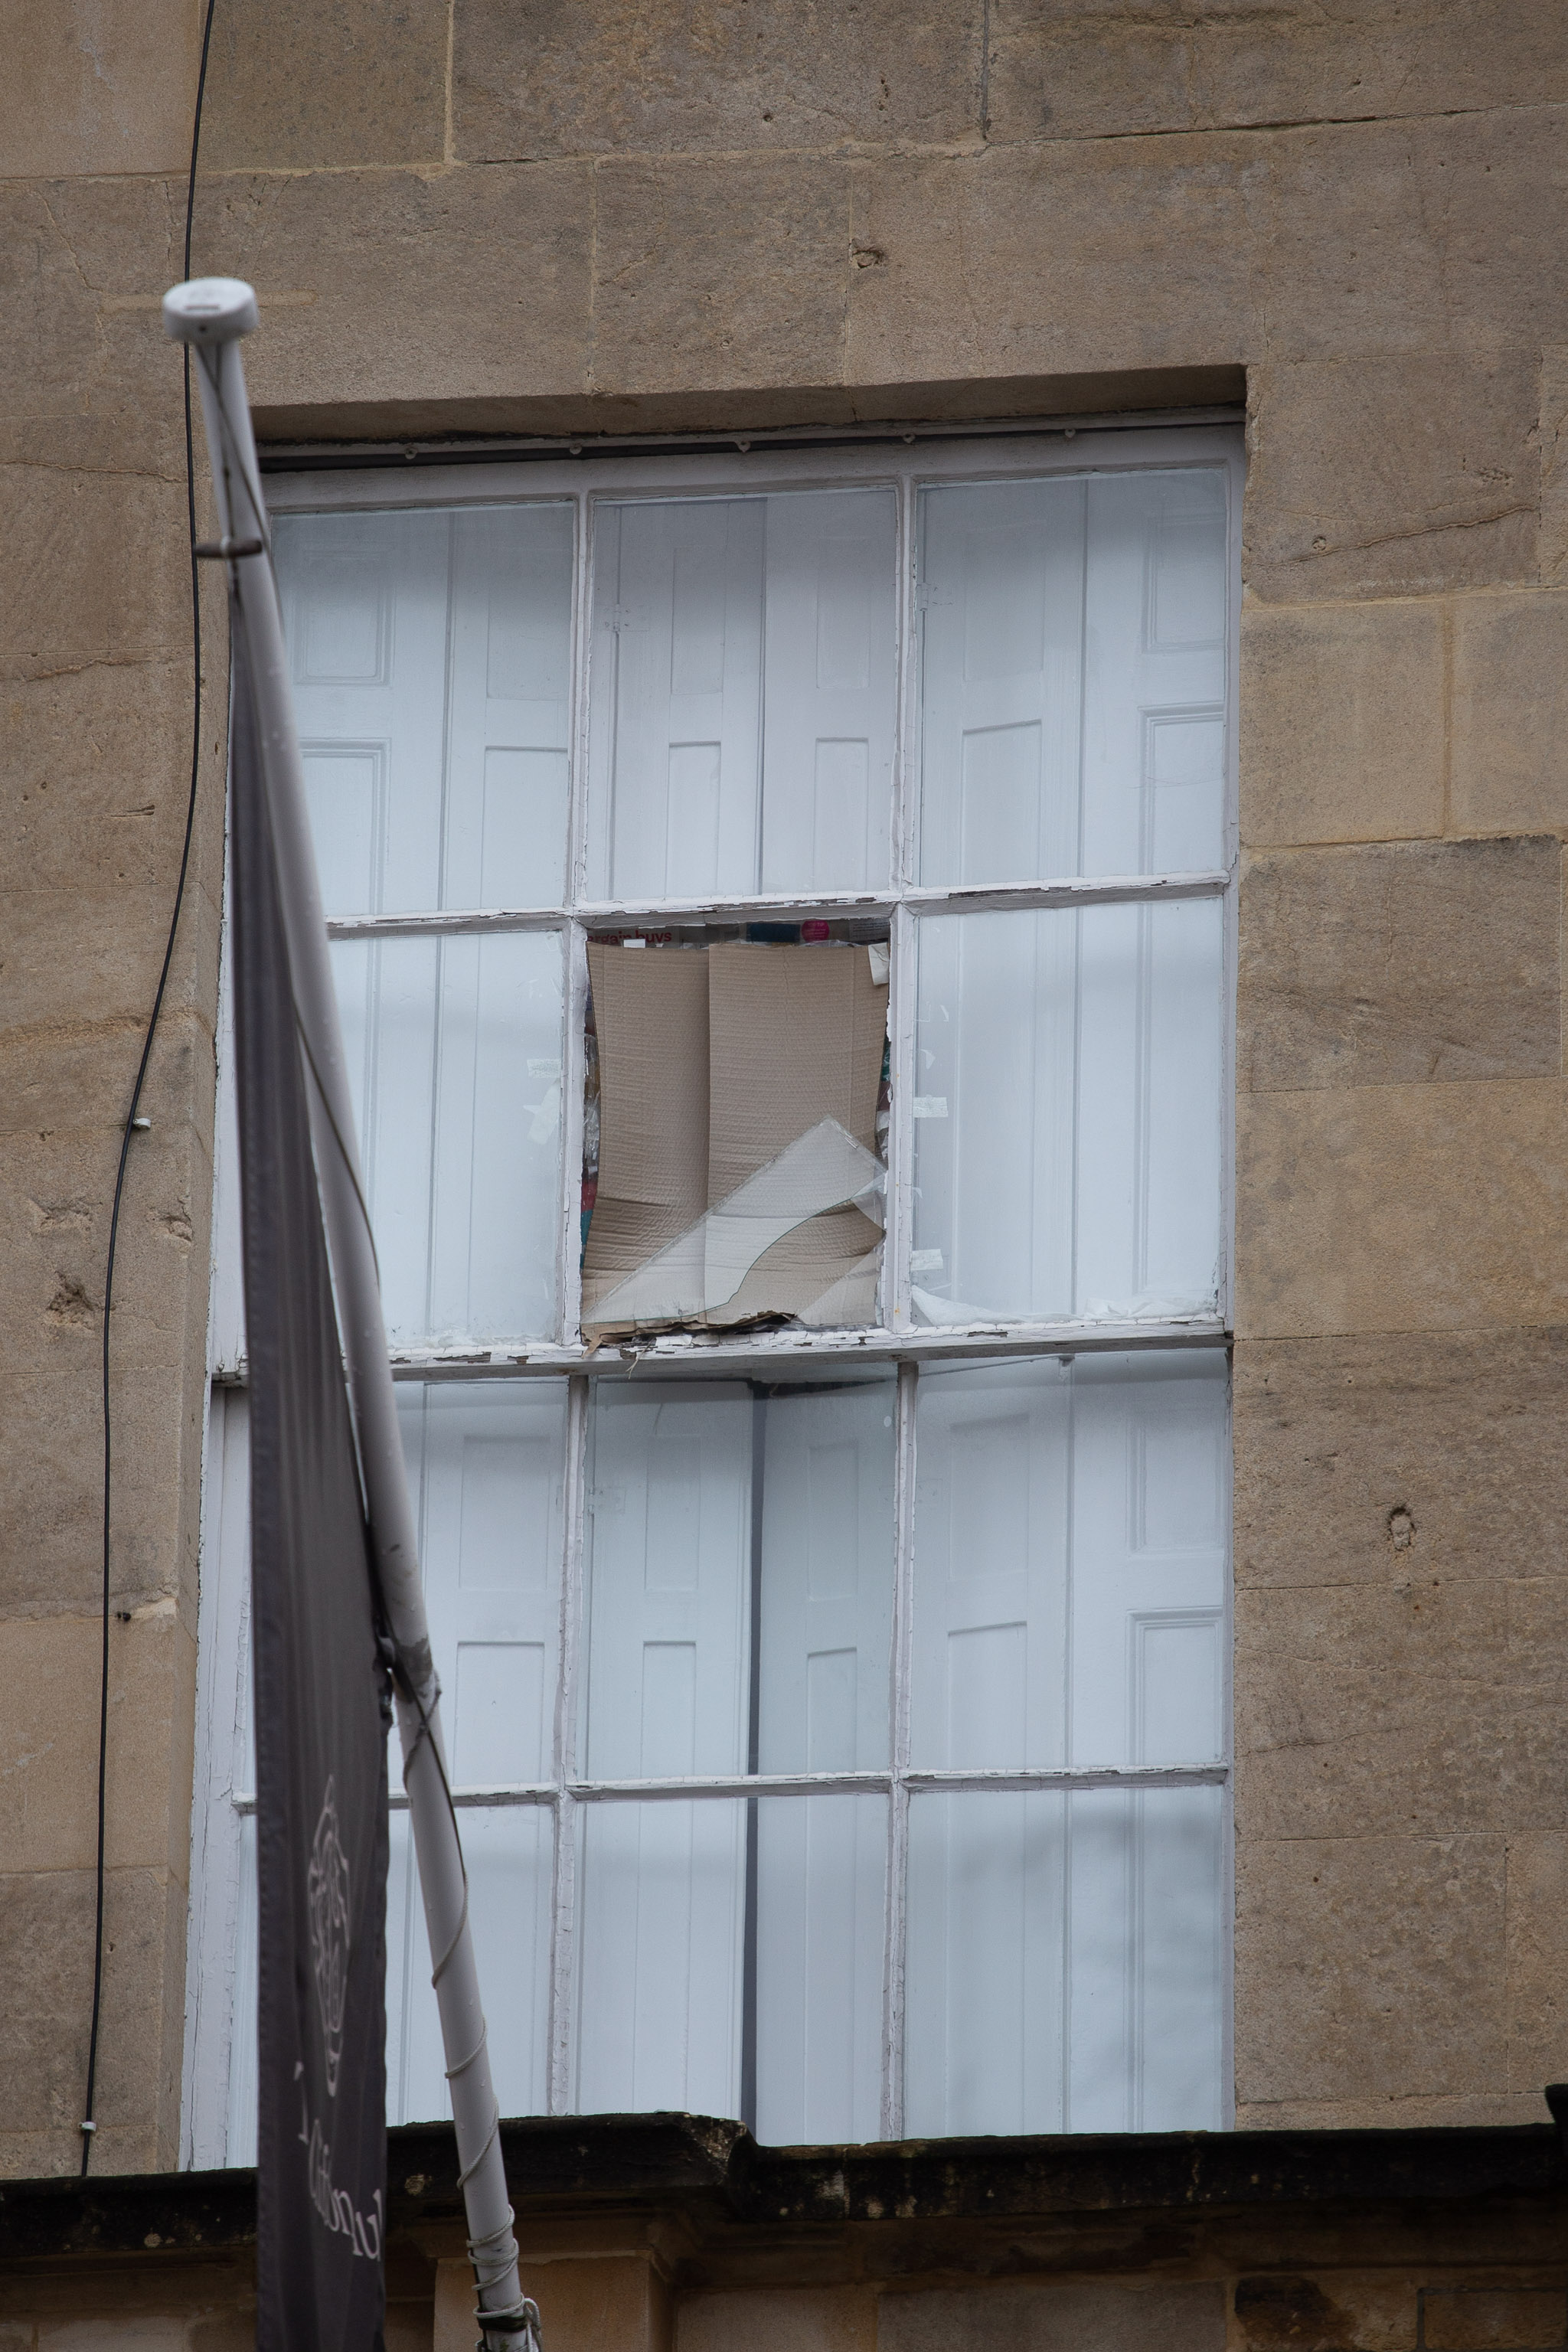 Broken Window
Has some local socialist been throwing rocks through the Clifton Club windows? Or maybe some descendant of WG Grace (a former member) was re-enacti...